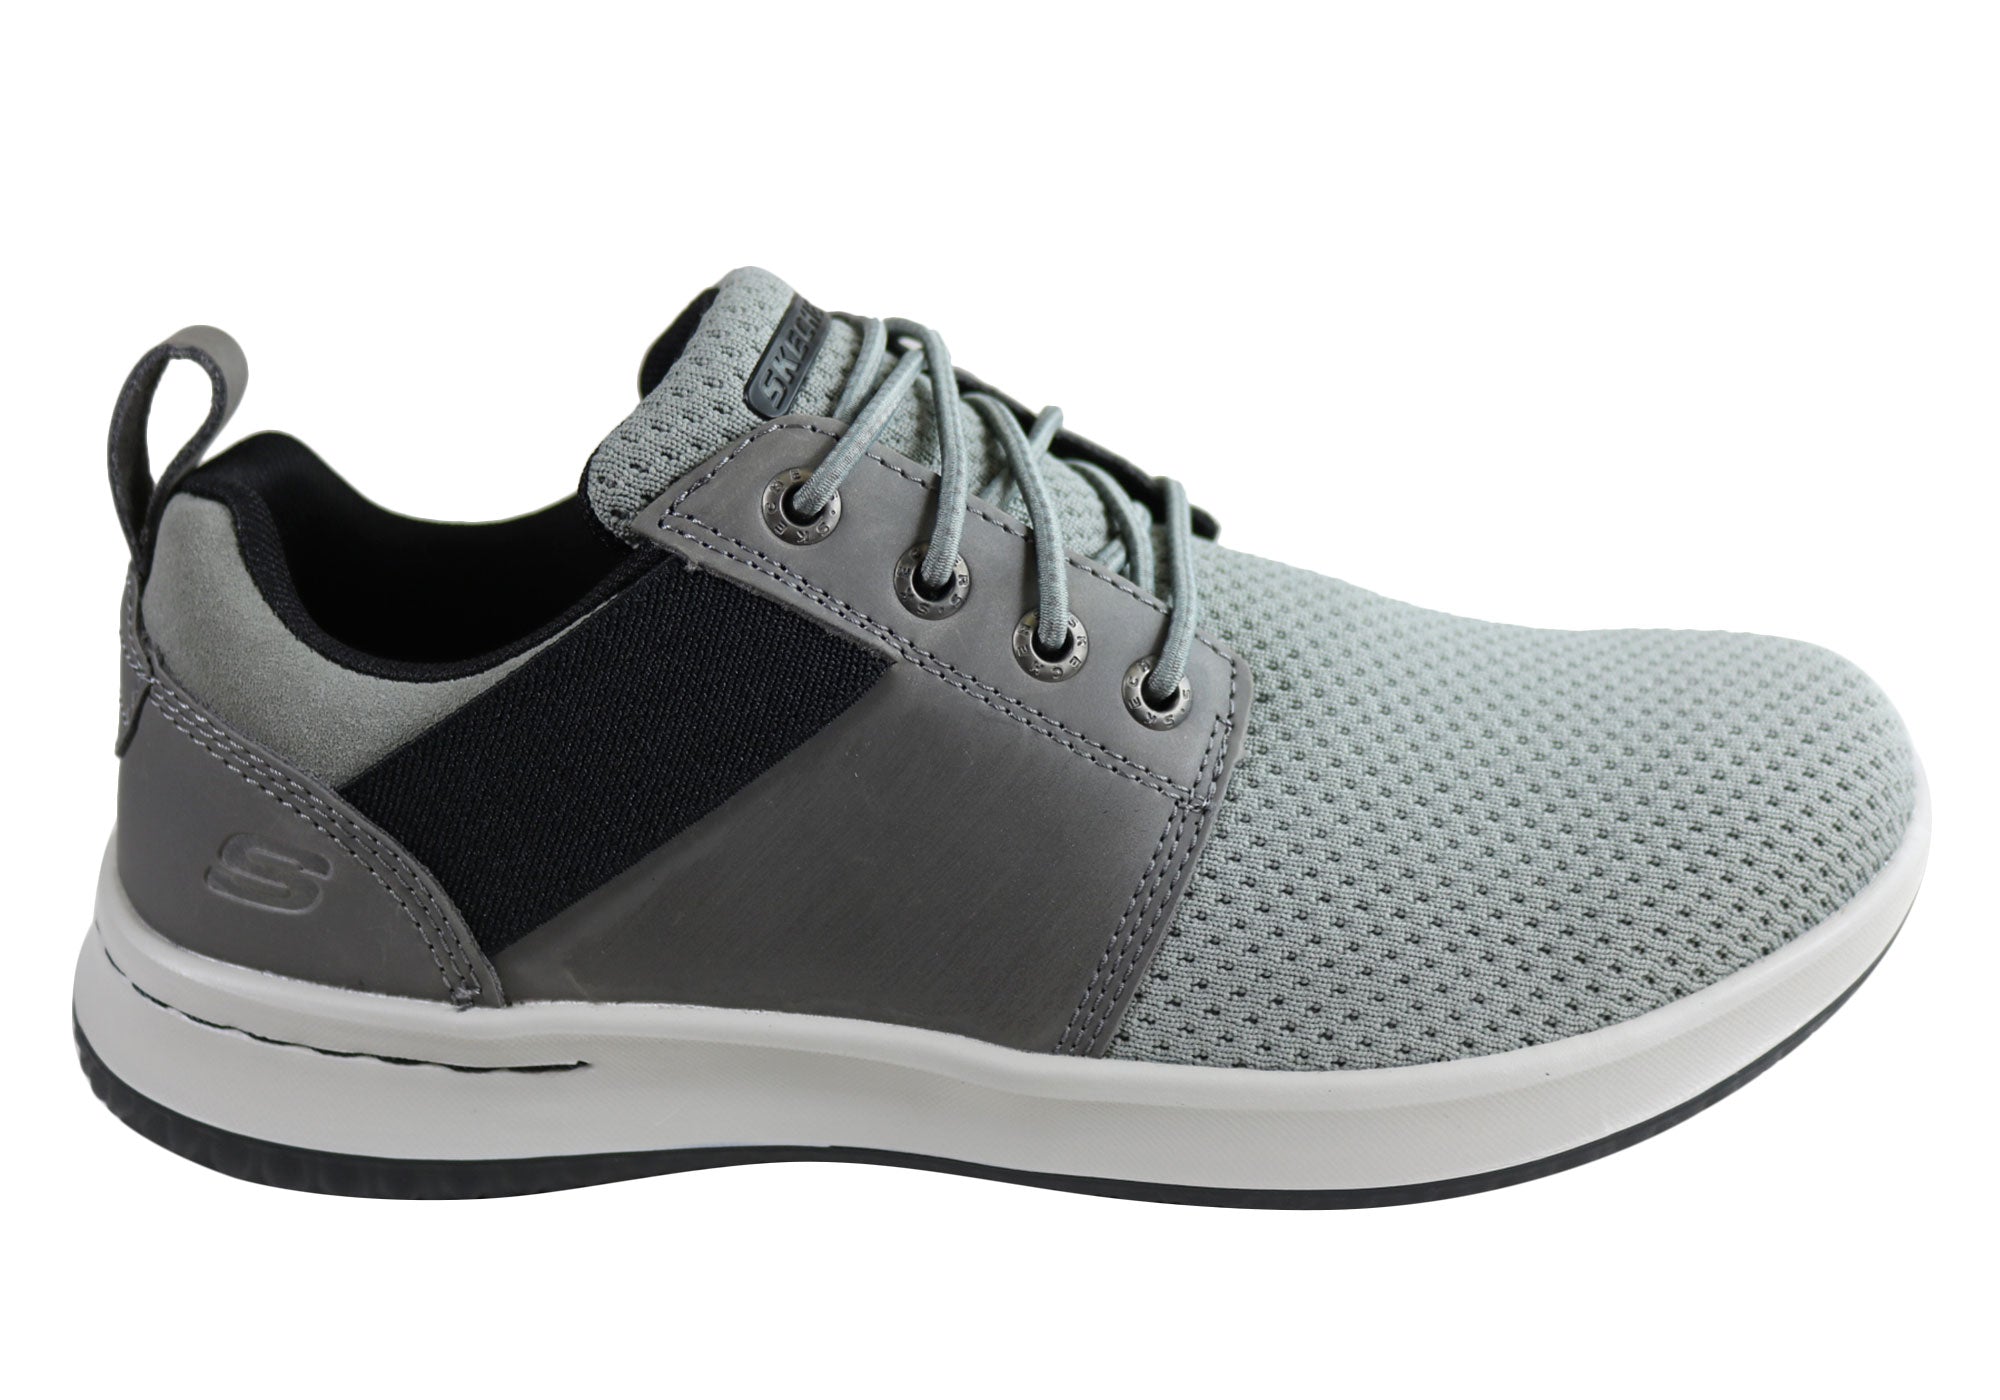 Skechers Hotsell, SAVE 56%.